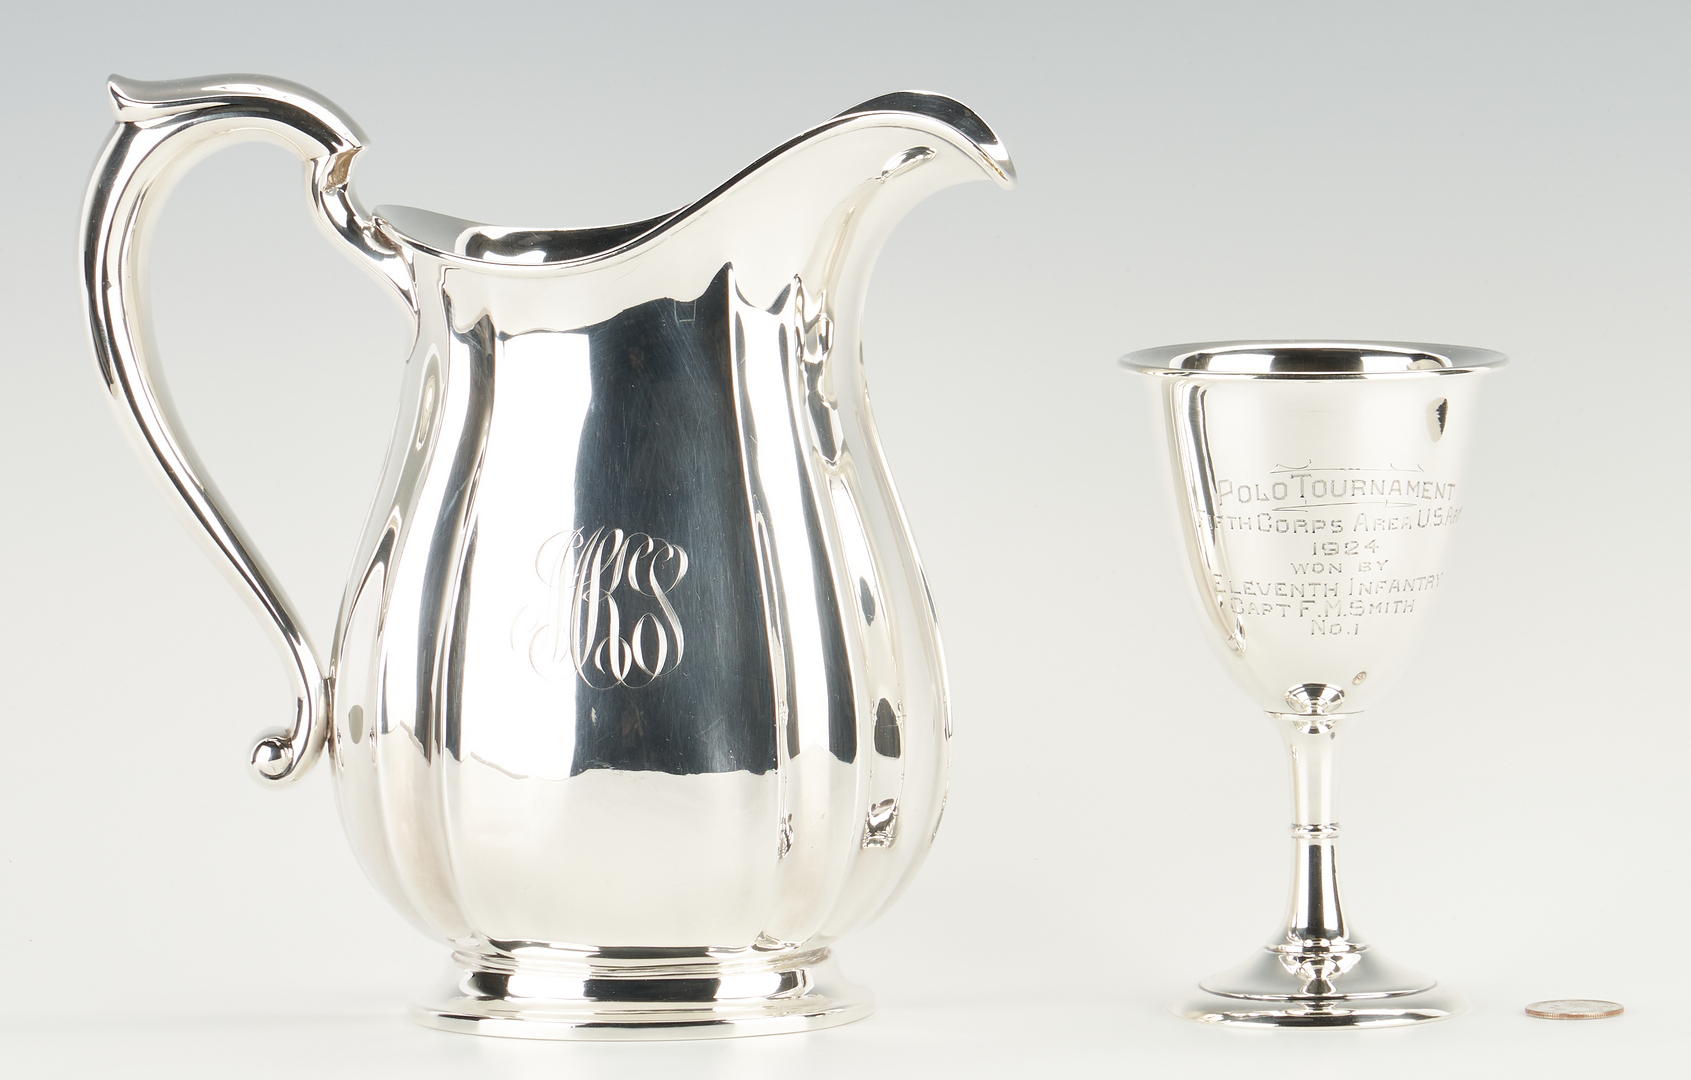 Lot 1228: Sterling Silver Water Pitcher & Polo Tournament Presentation Goblet, 2 items